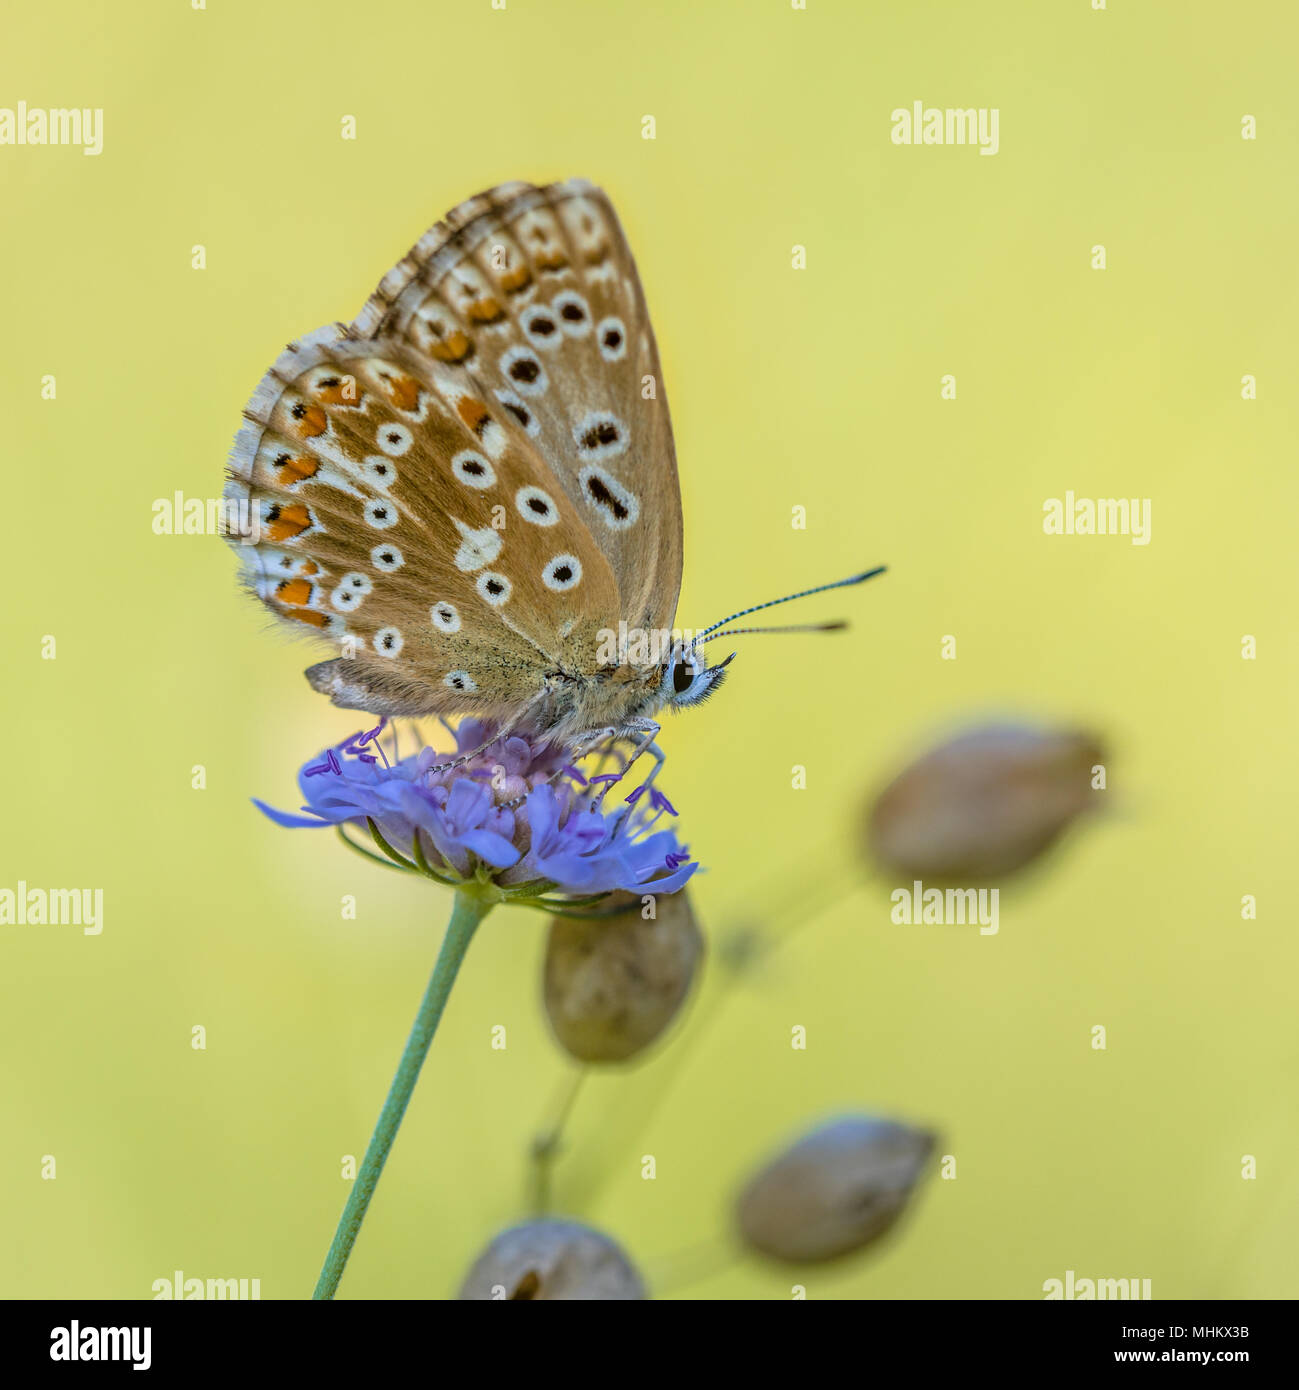 Chalkhill blue (Polyommatus coridon) butterfly on flower with bright green background Stock Photo